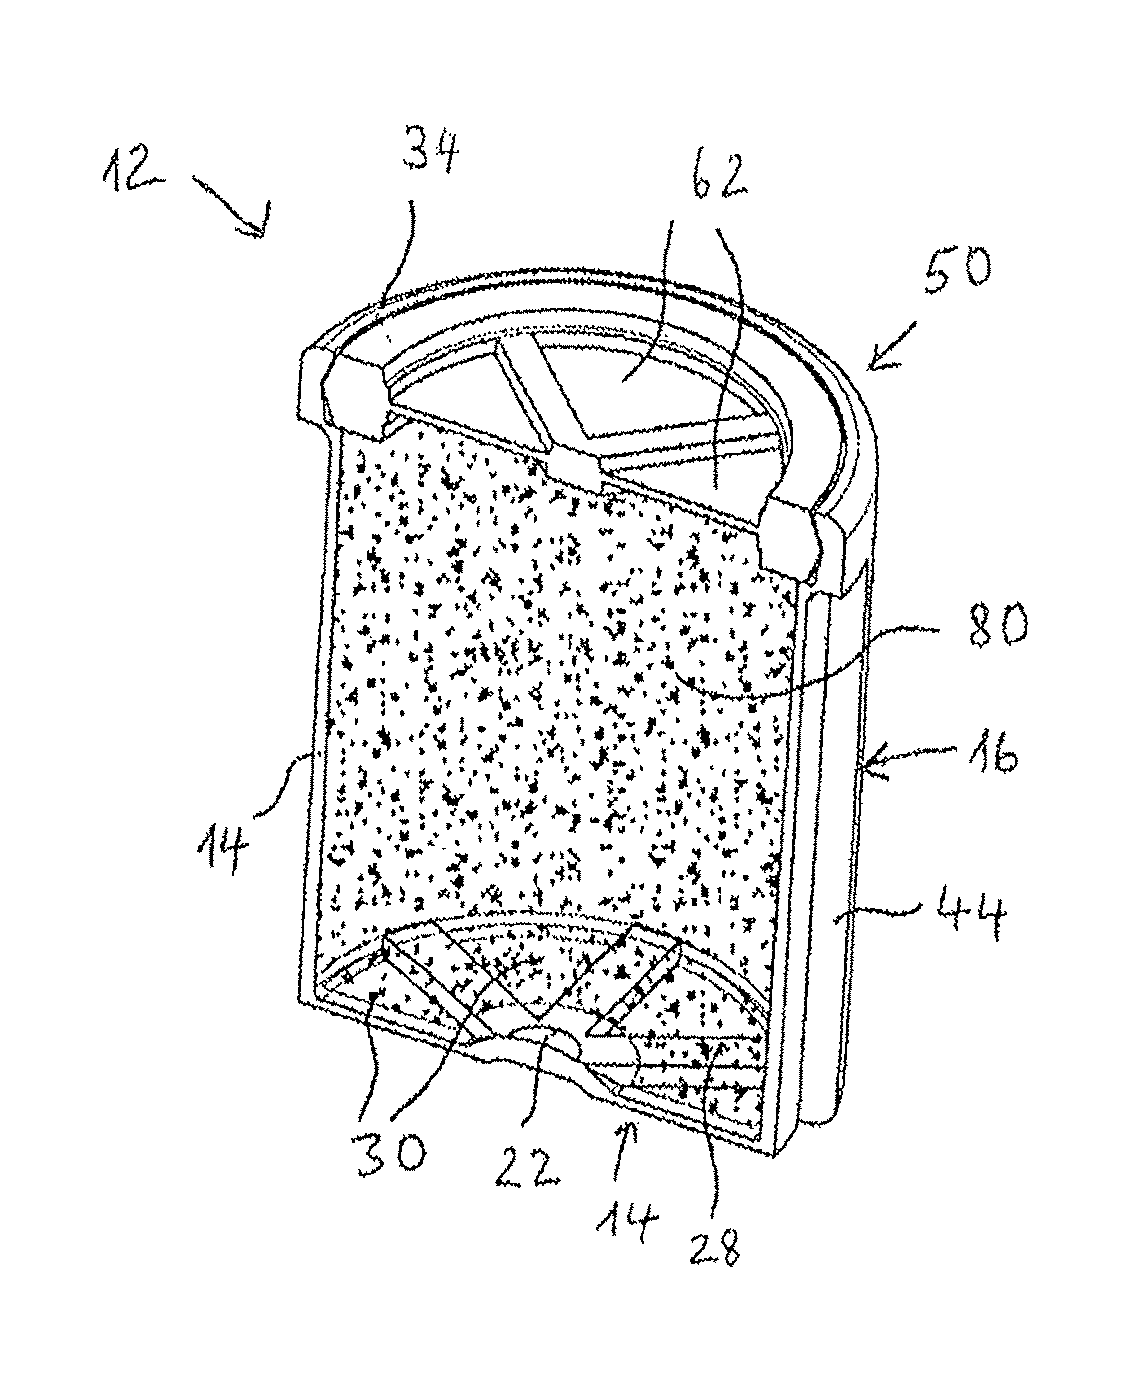 Canister for containing an active material